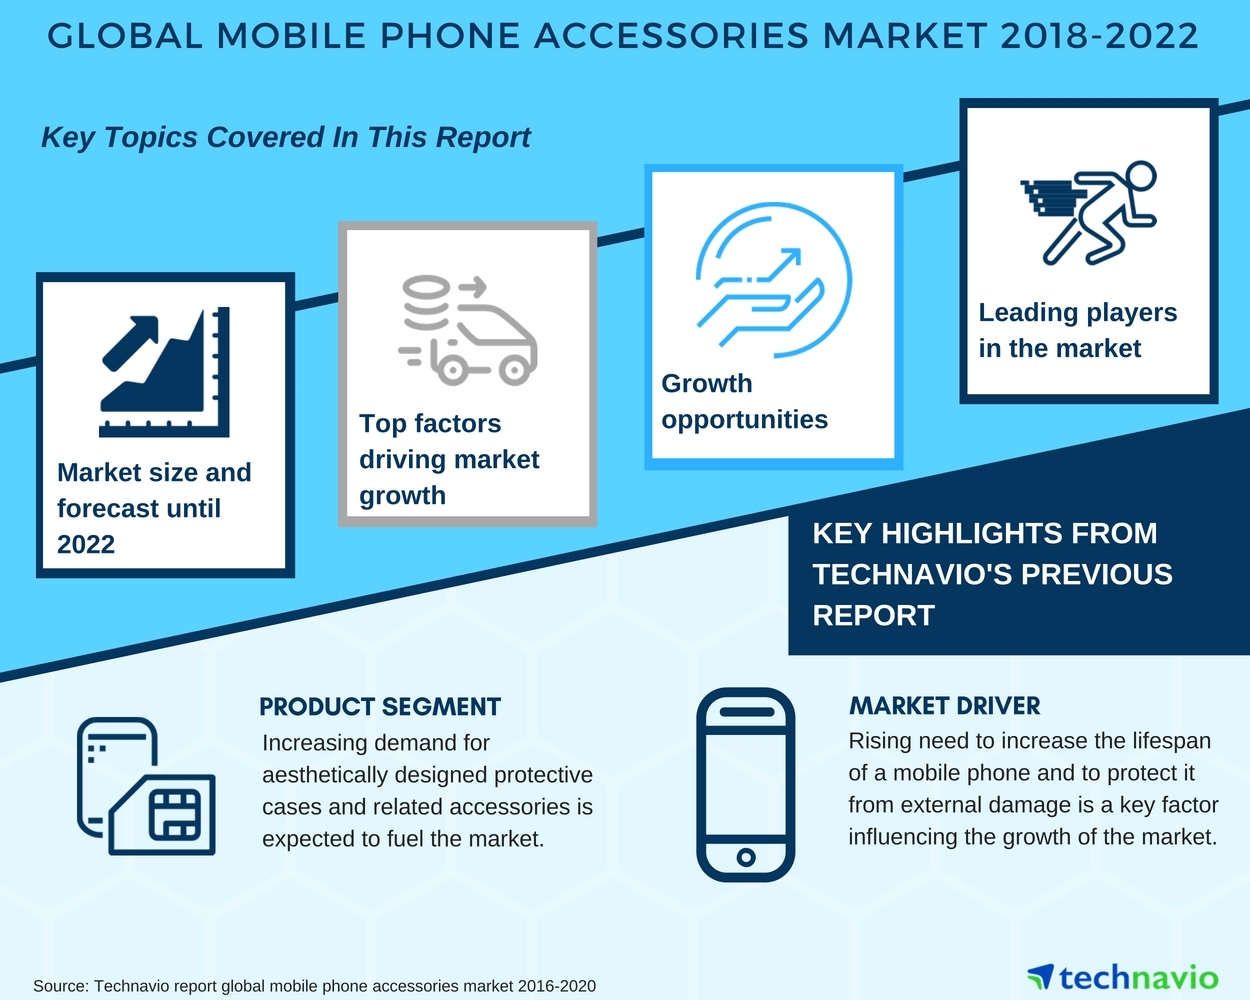 Global Mobile Phone Accessories New Market Research Report by Technavio | Business Wire